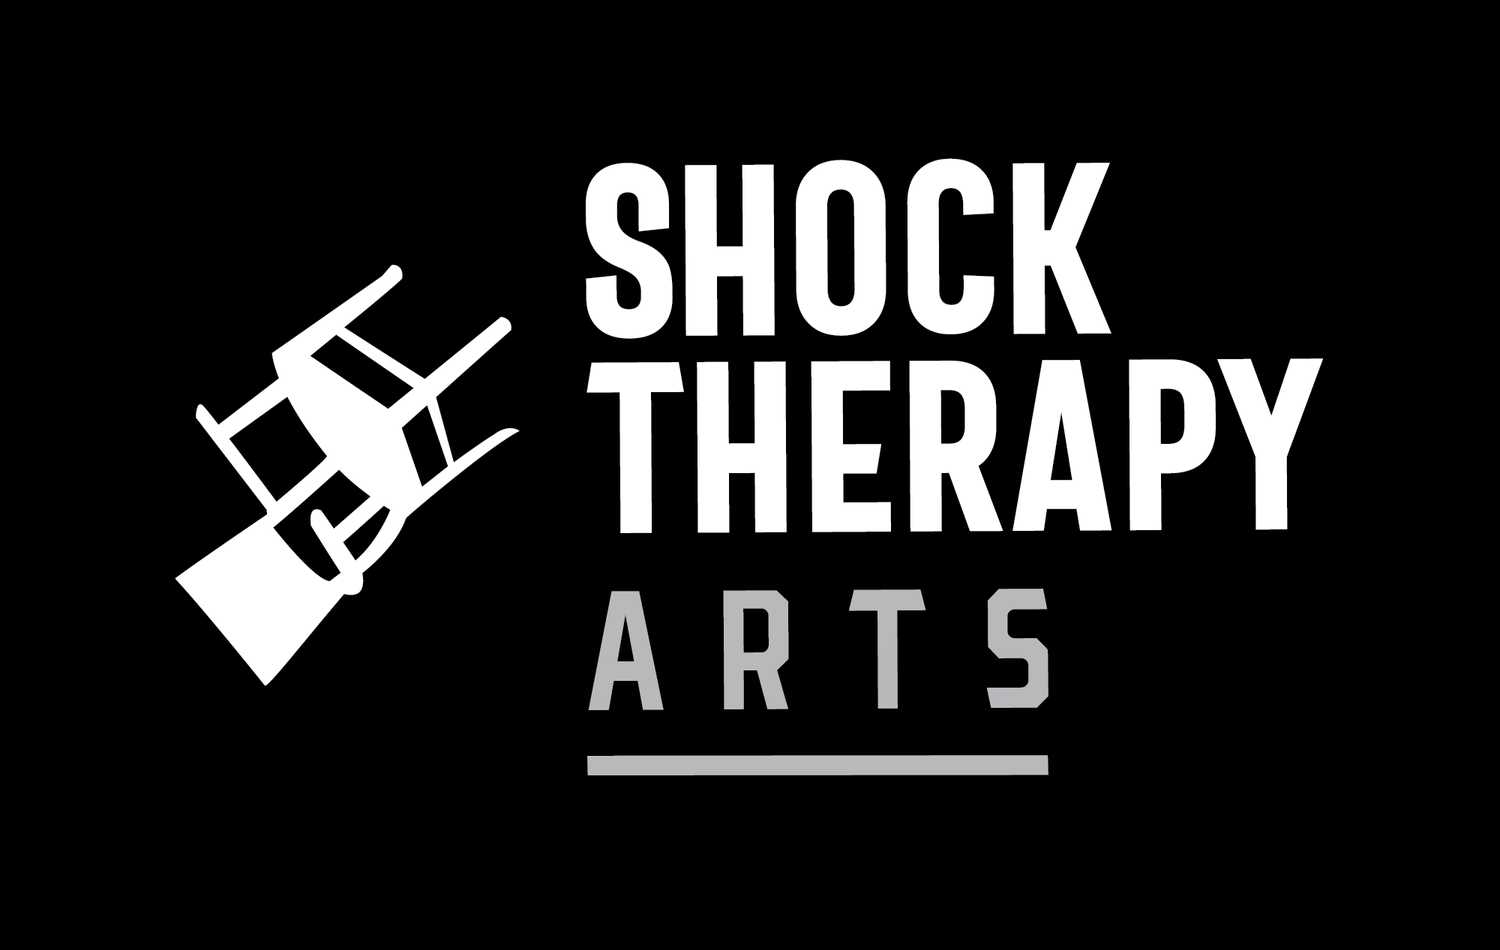 Shock Therapy Arts